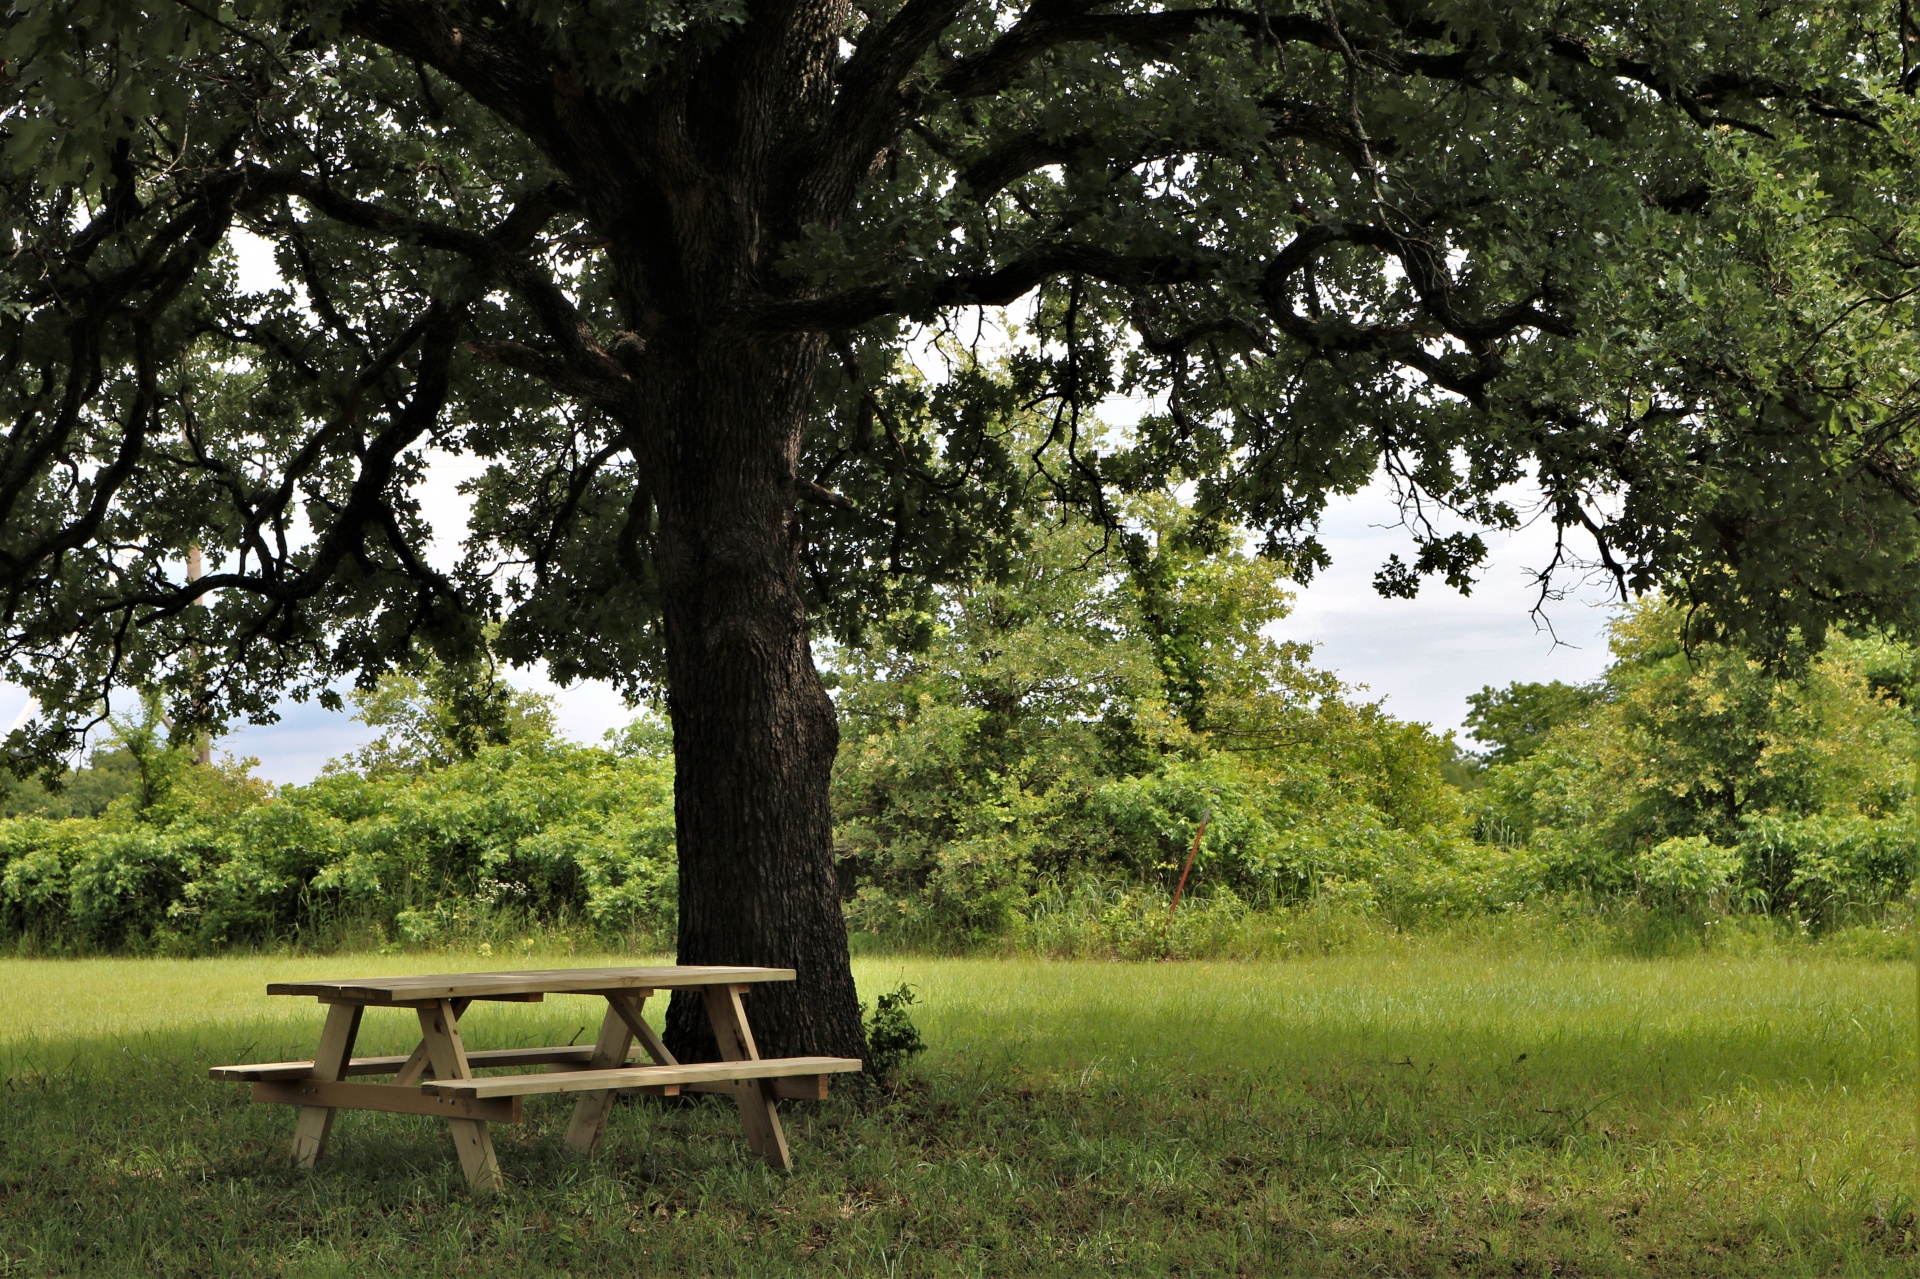 A wood picnic table sitting underneath a large oak tree, in a green country field.